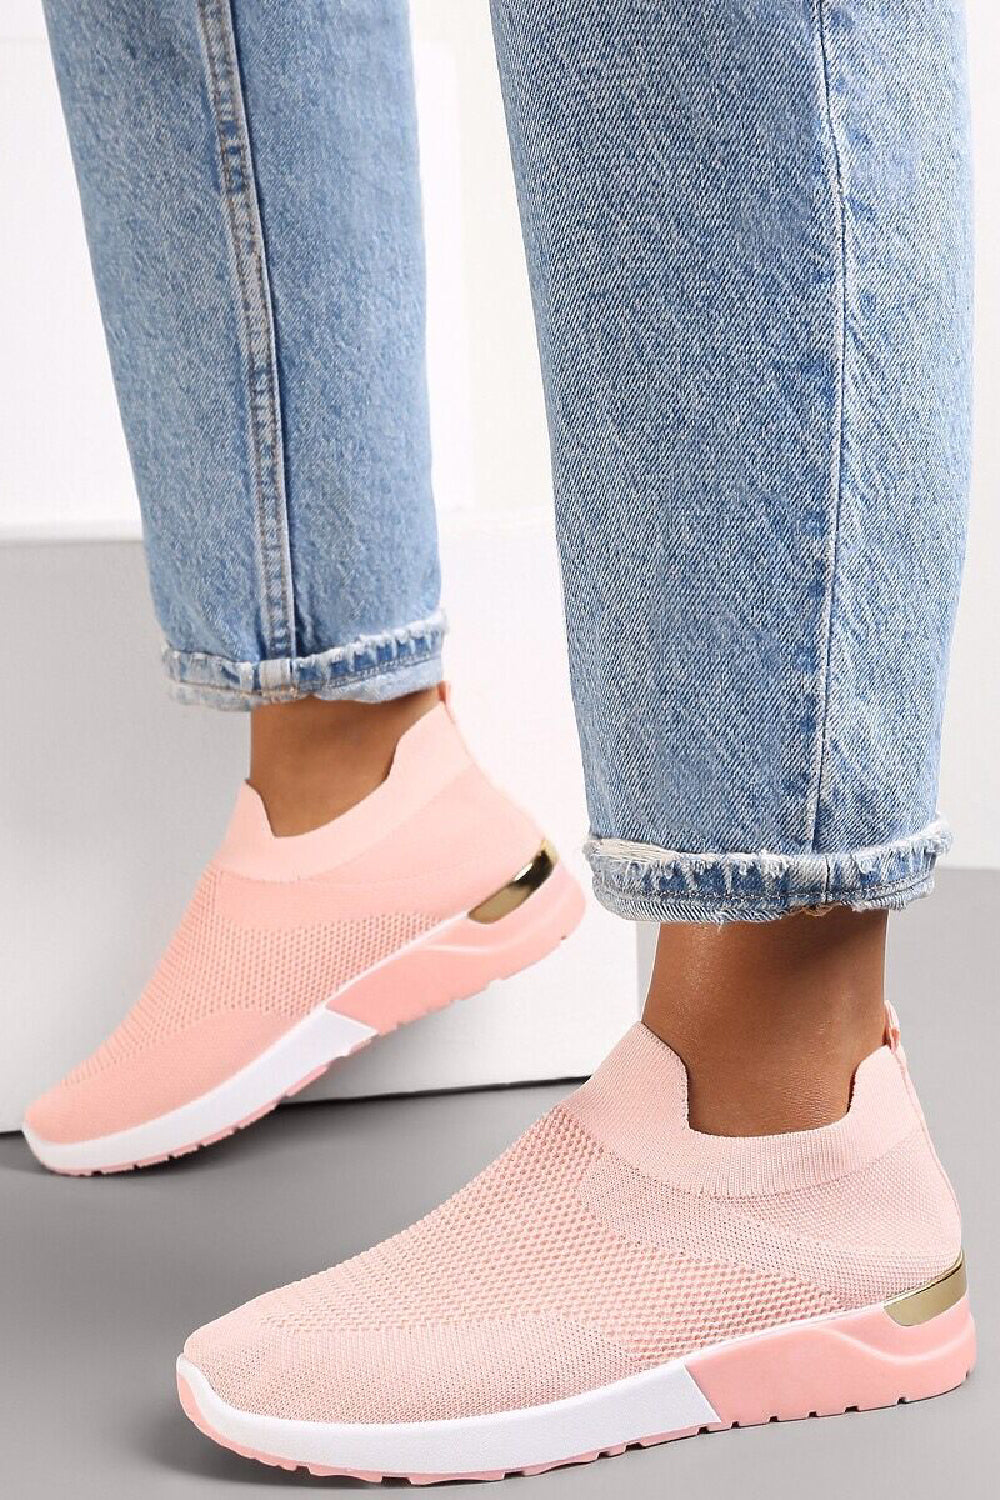 PINK SLIP ON GOLD CLIP HEEL DETAIL TRAINERS SHOES